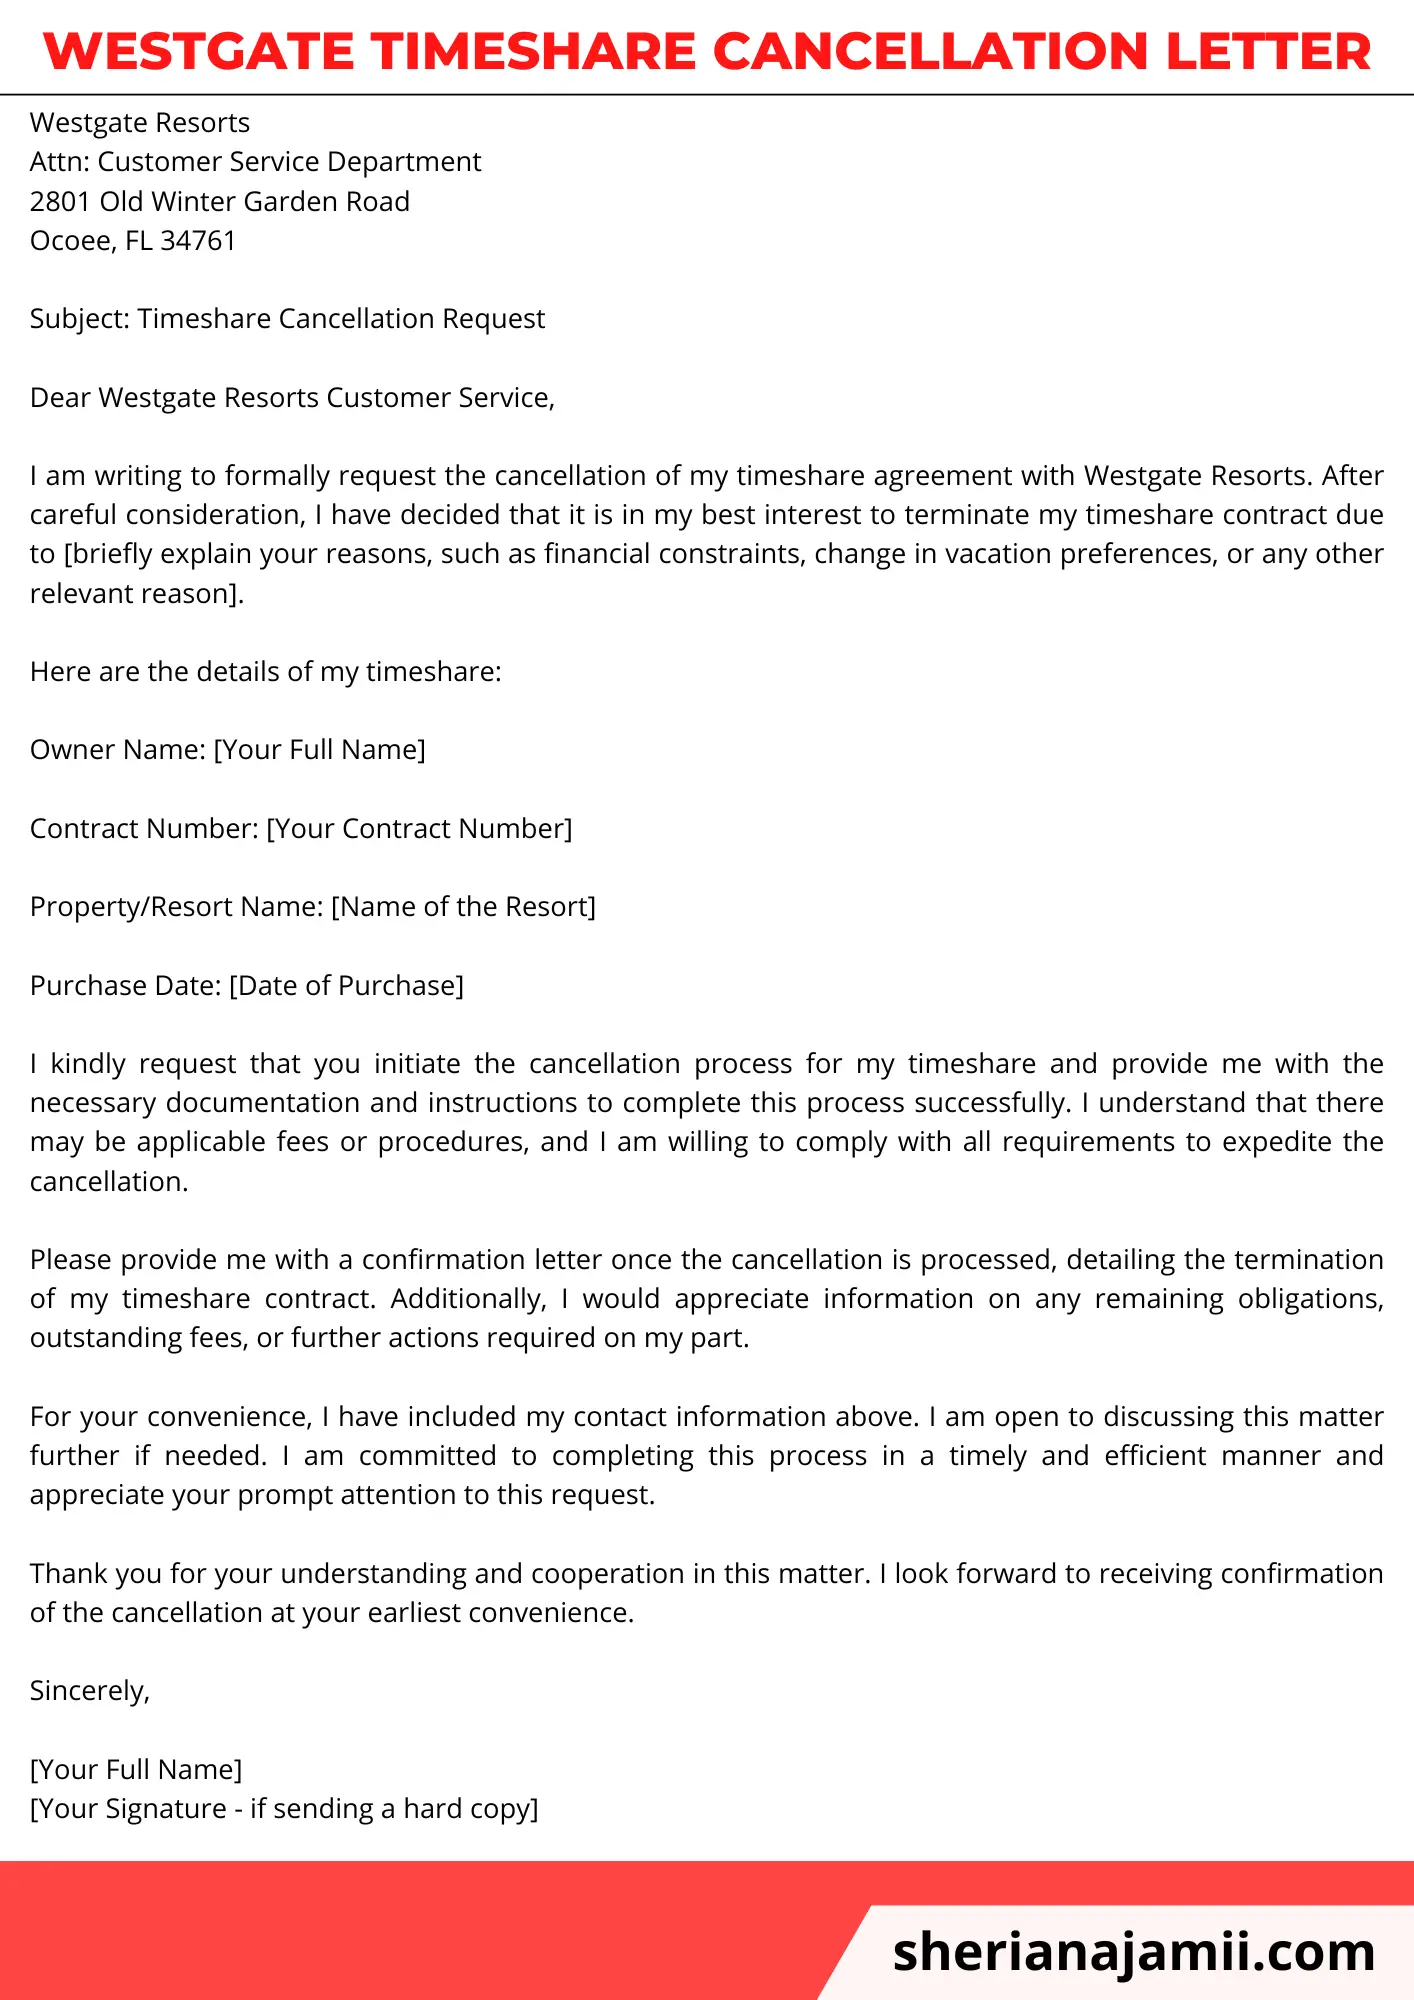 westgate timeshare cancellation letter, westgate timeshare cancellation letter sample, westgate timeshare cancellation letter template